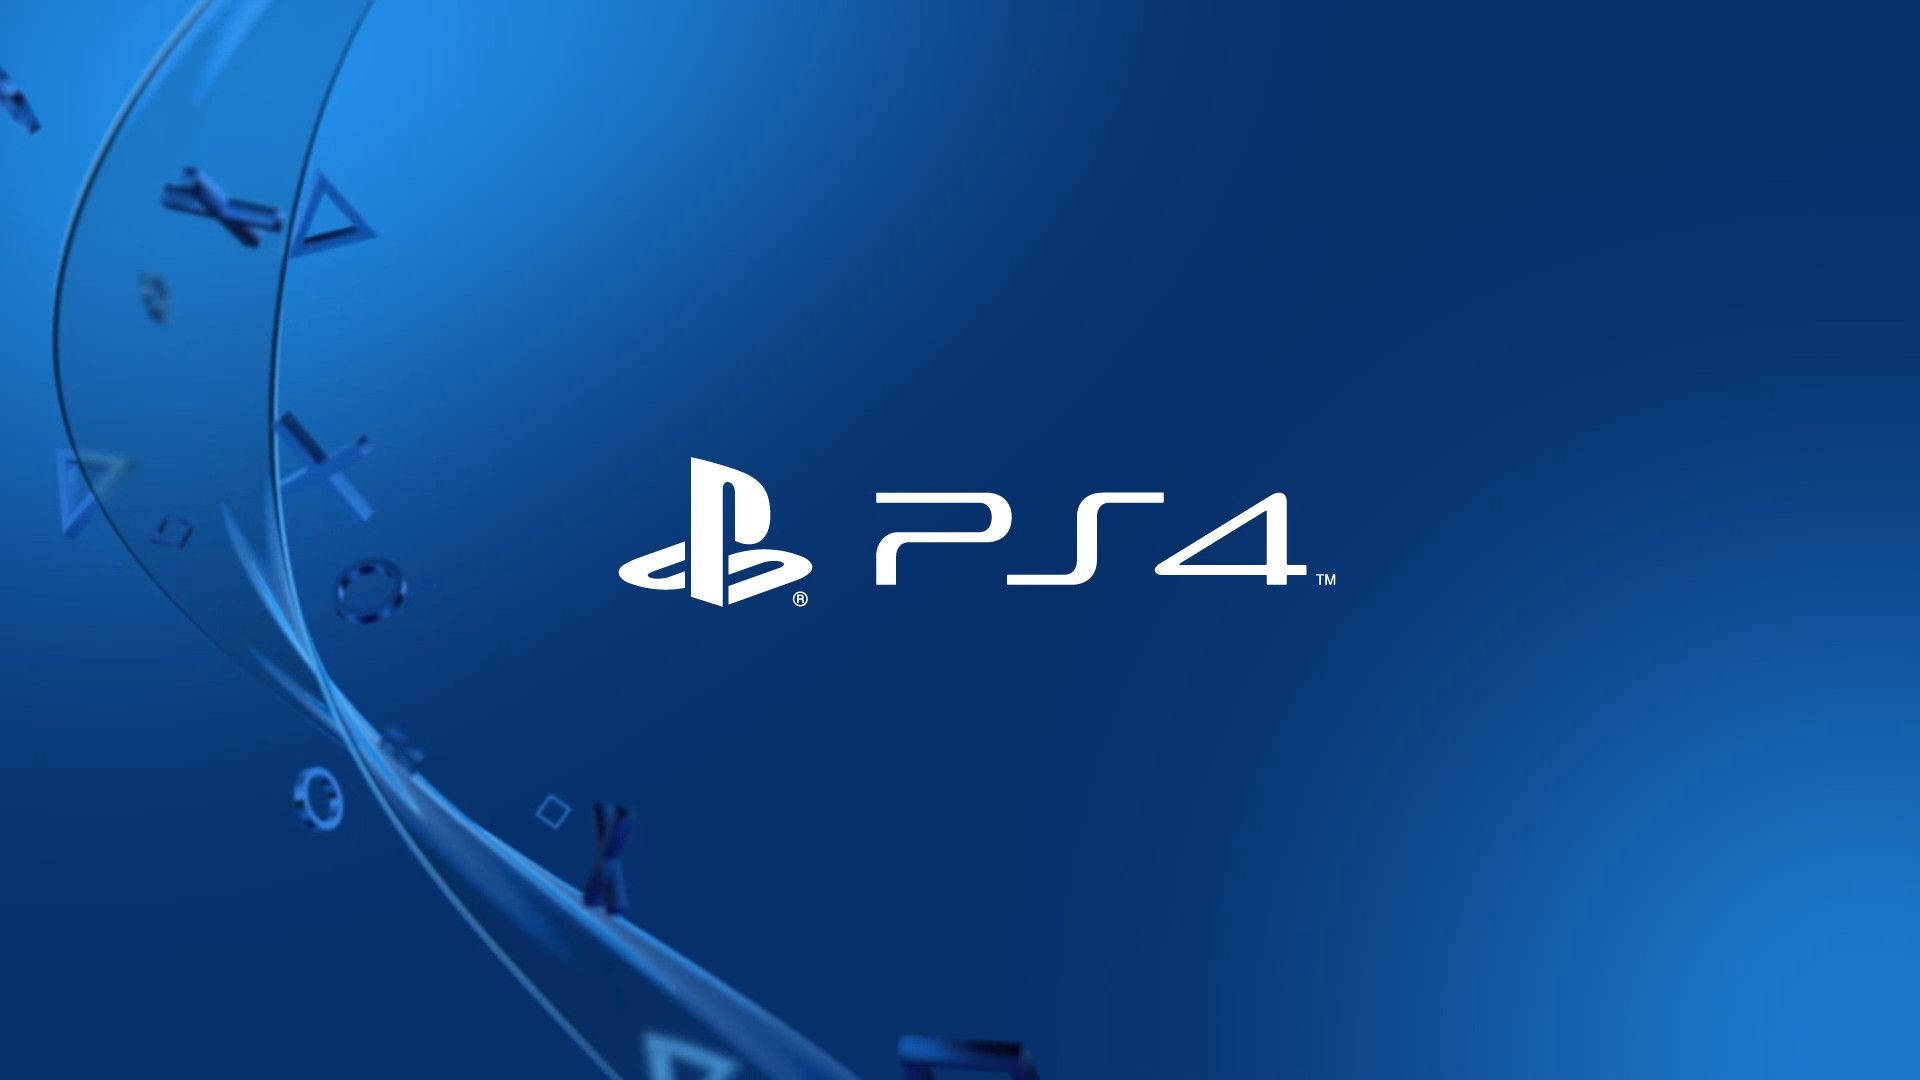 Ps4 Background